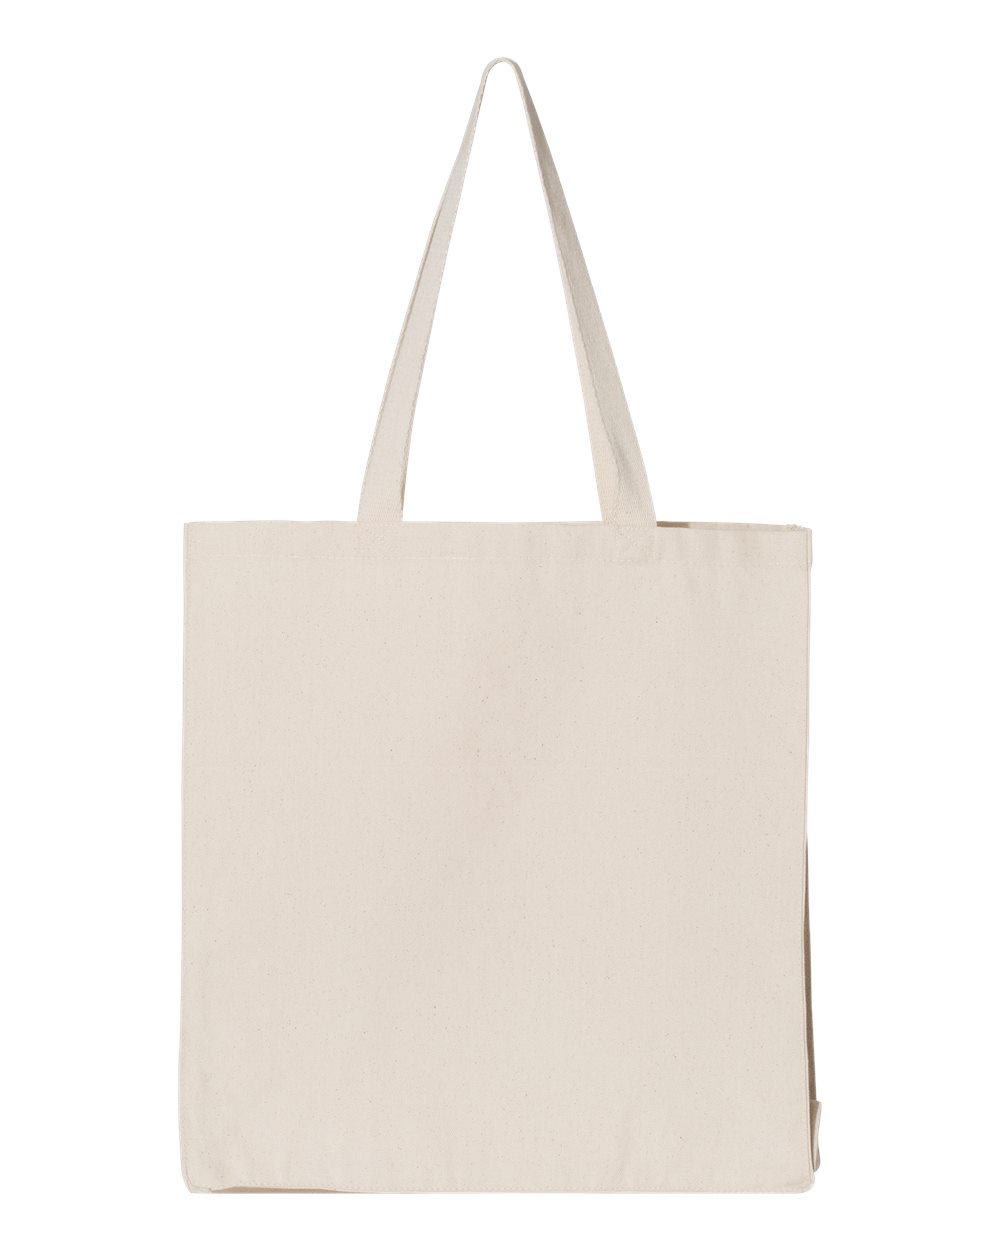 Promotional Shopper Tote-